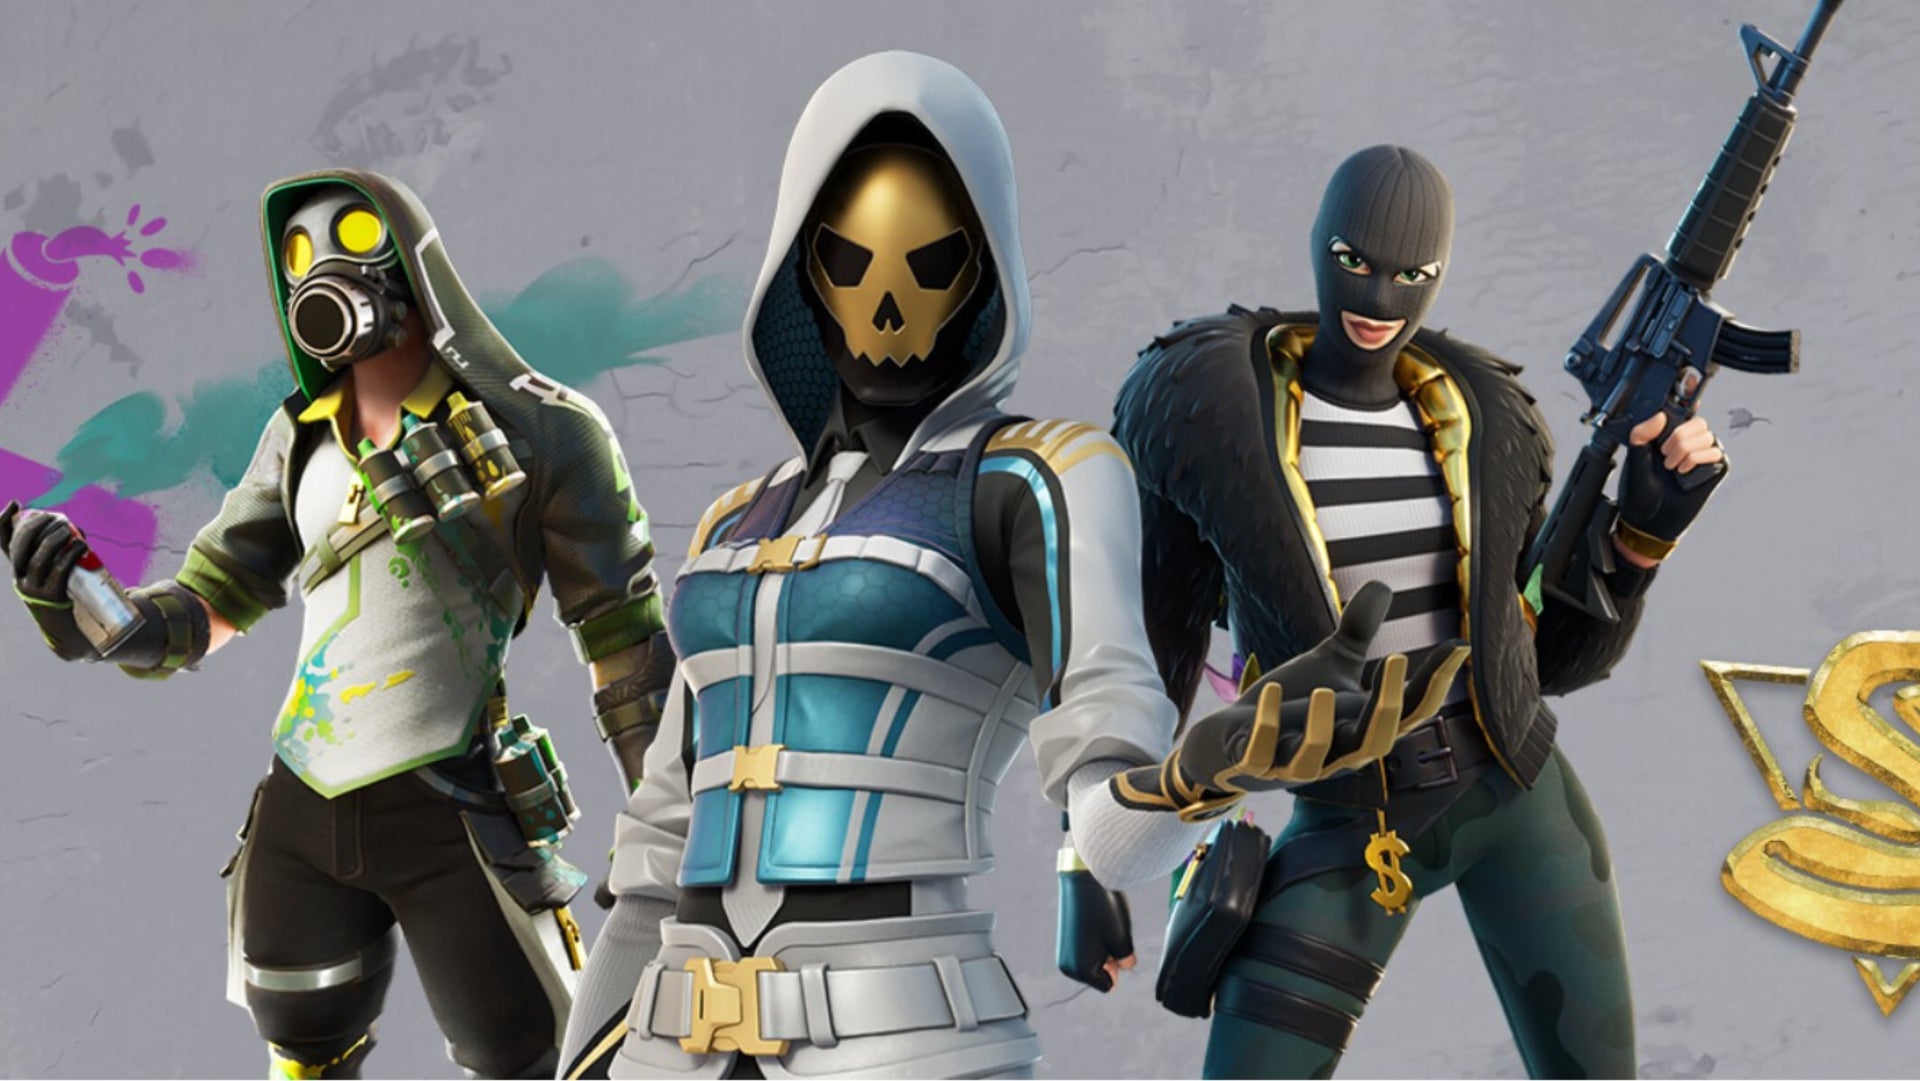 Fortnite, official Epic Games artwork of three characters from the Most Wanted event. In the middle is a character in a gold Skull mask.